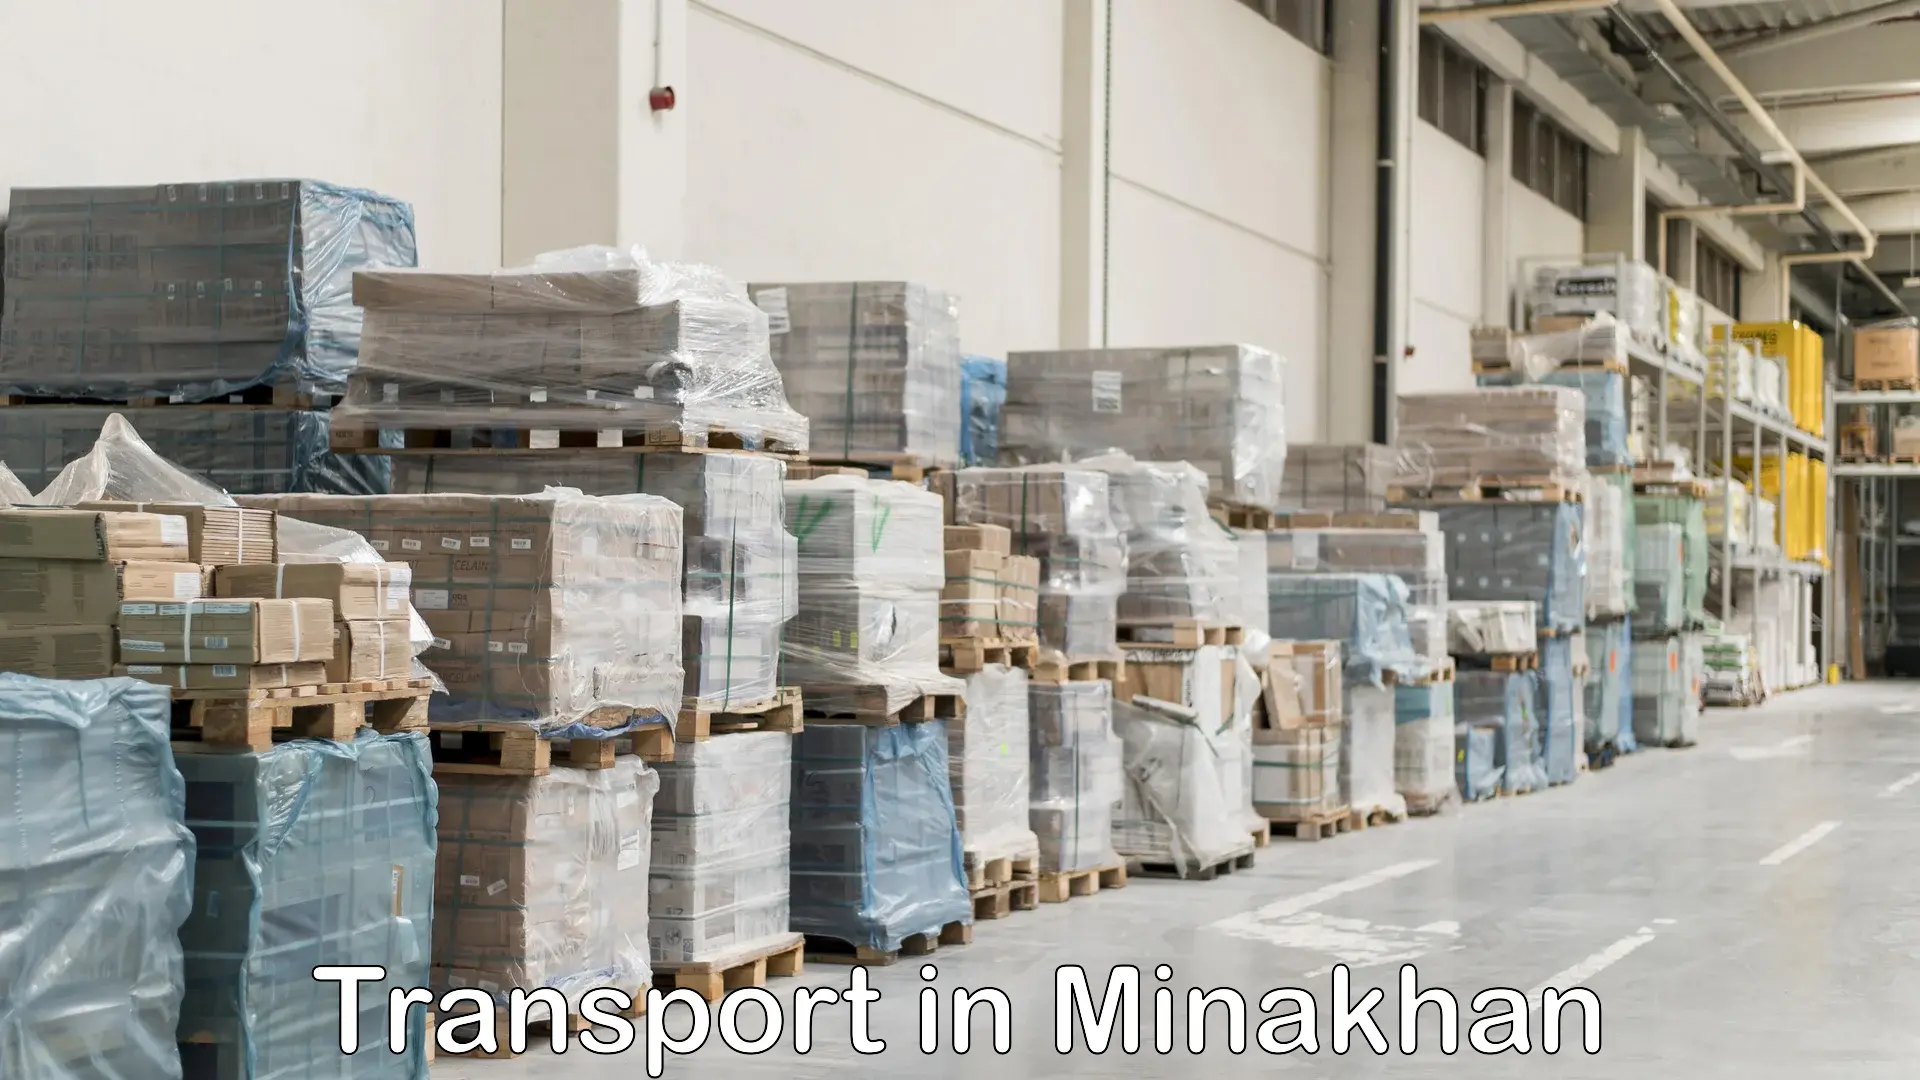 Package delivery services in Minakhan